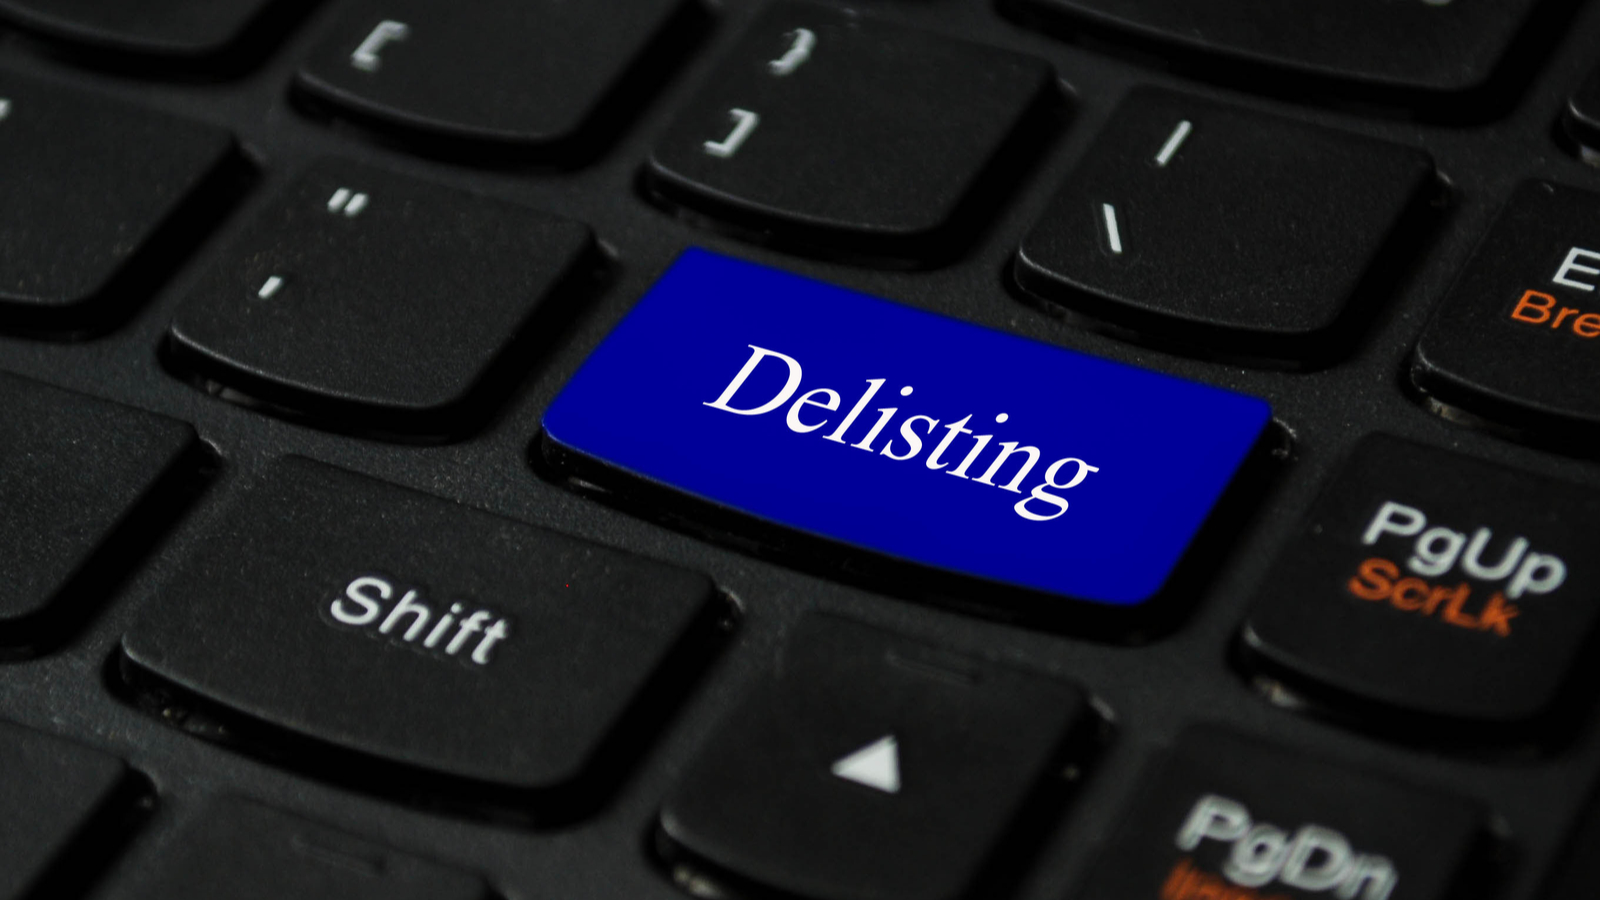 delisted stocks delisting text written on a keyboard. DS Stock is getting delisted.